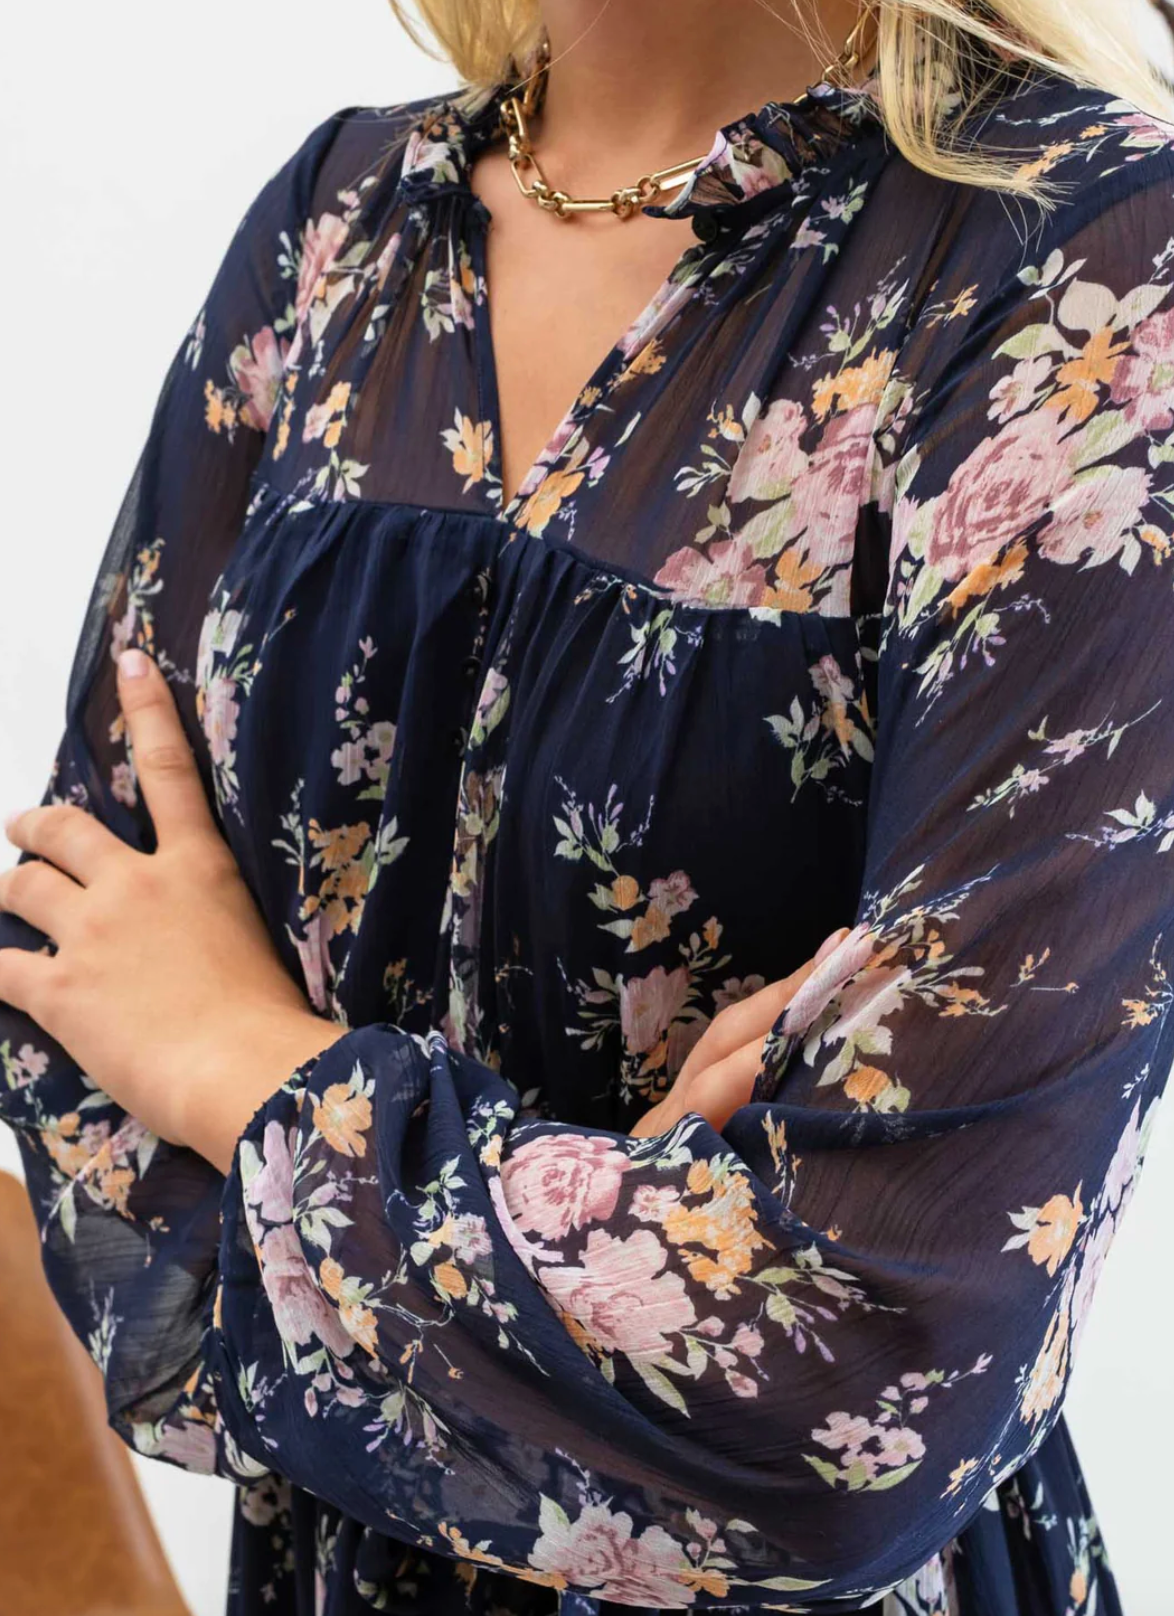 Floral Long Sleeve Midi Dress in Navy - The Street Boutique 